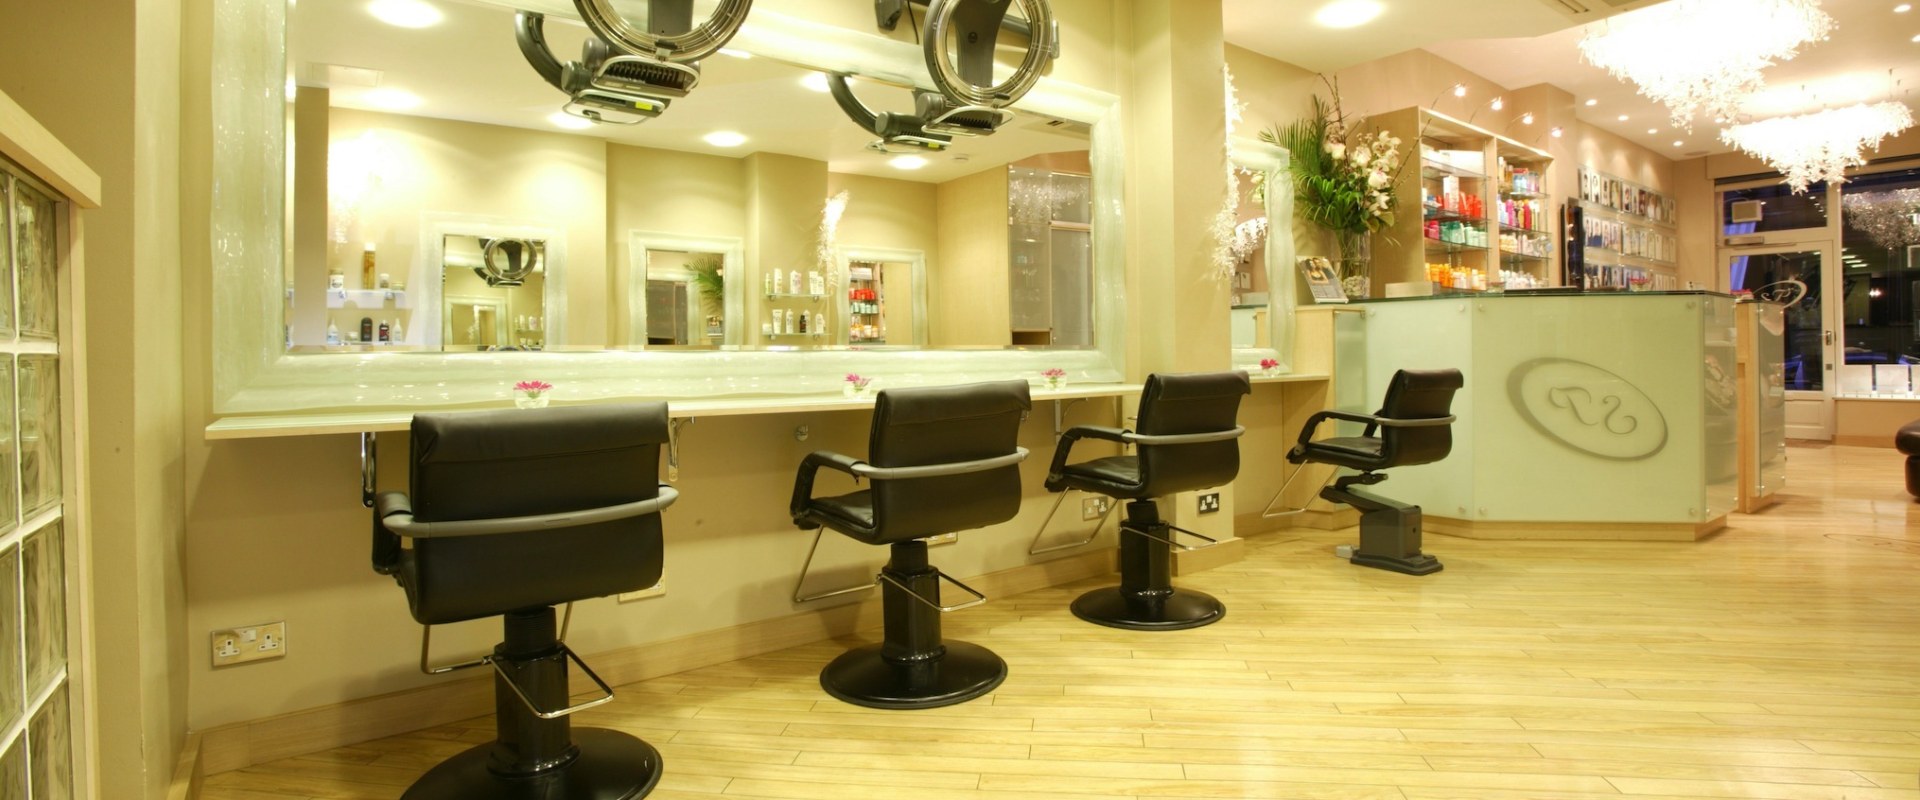 Discounts for Seniors at Beauty Salons in London - Get the Best Deals Now!